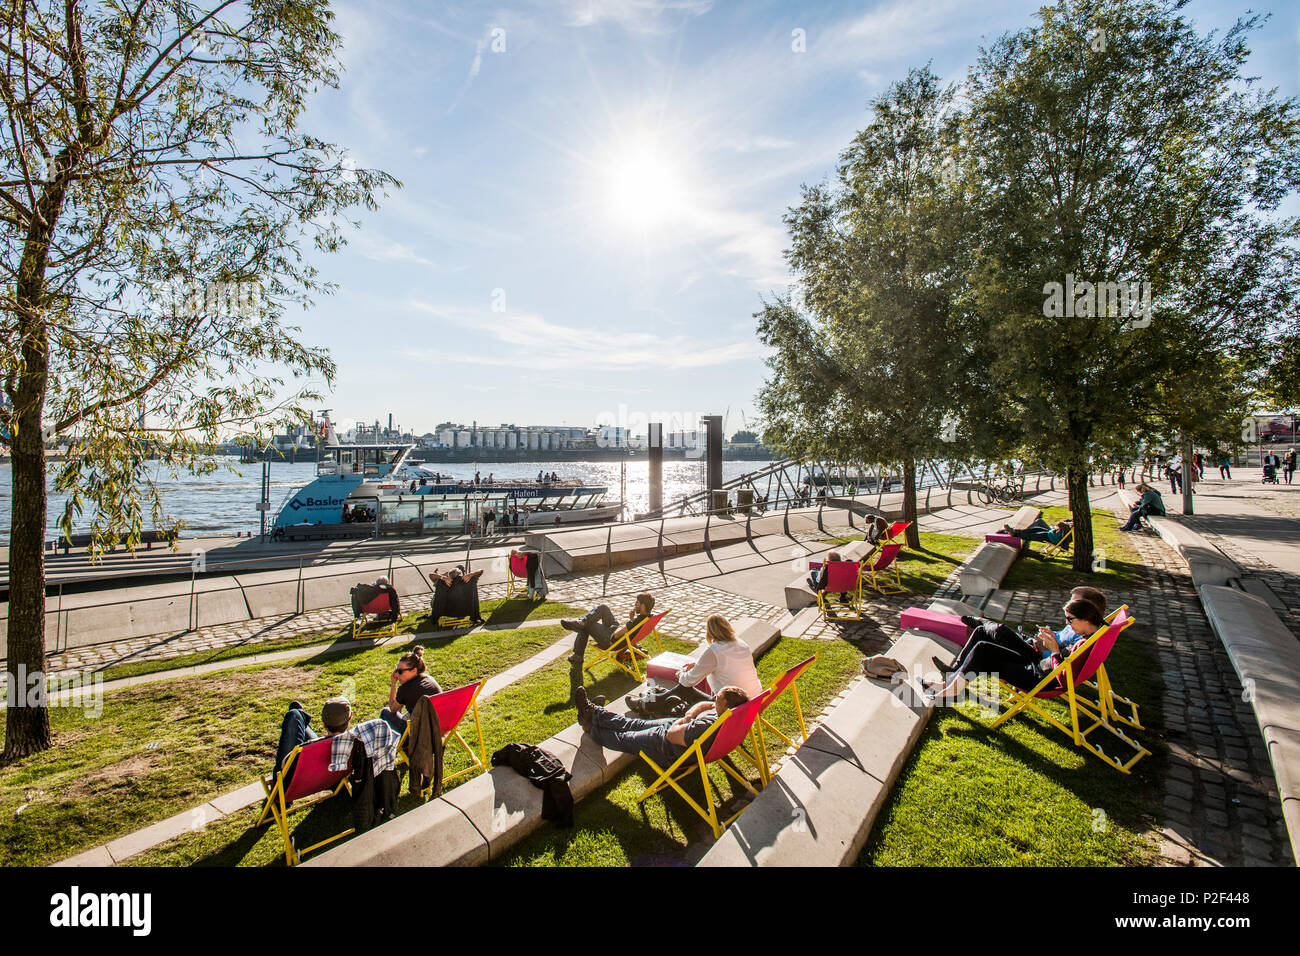 people chilling at the Dalmannkai in the Hafencity of Hamburg, north Germany, Germany Stock Photo